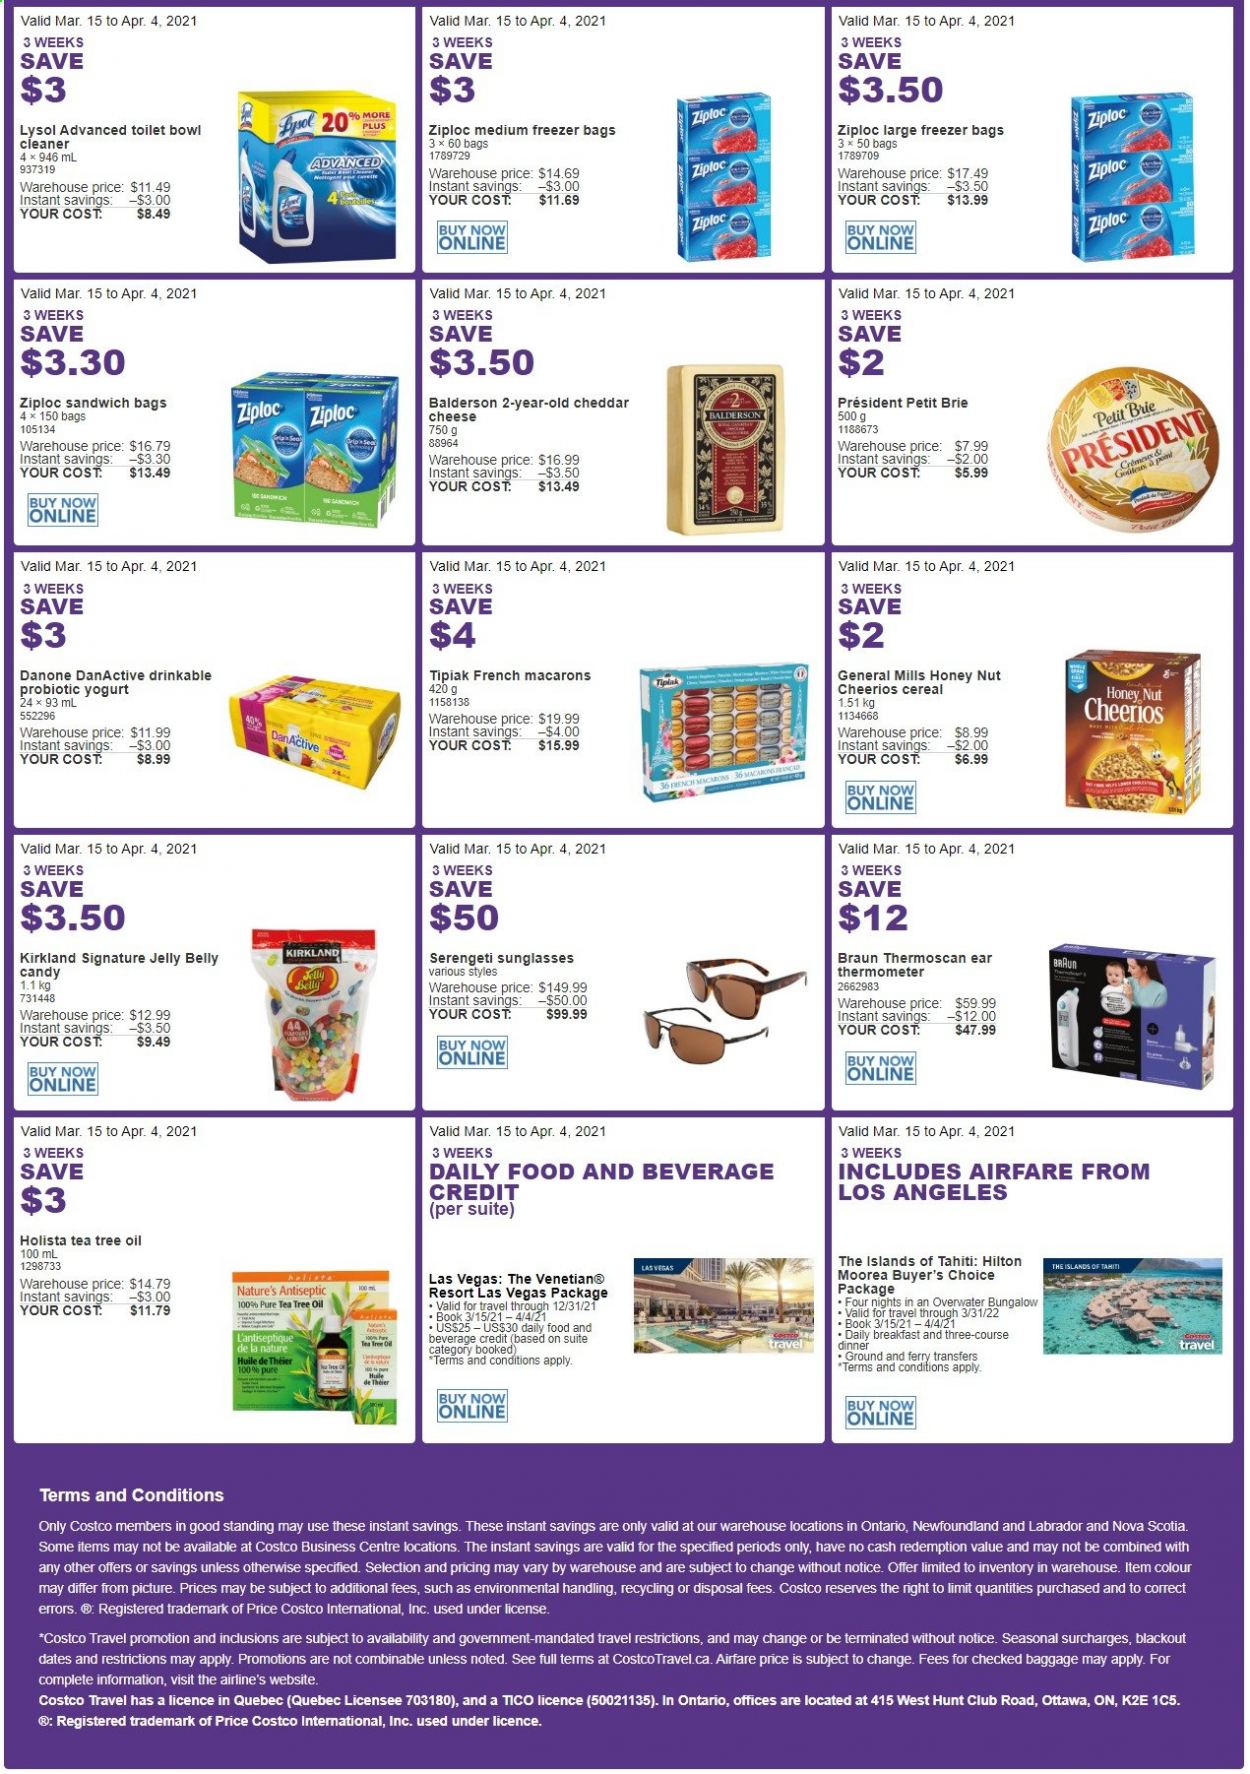 thumbnail - Circulaire Costco - 15 Mars 2021 - 04 Avril 2021 - Produits soldés - Brie, Danone, Tahiti, four, huile, macarons, sandwich, Braun, Candy. Page 2.